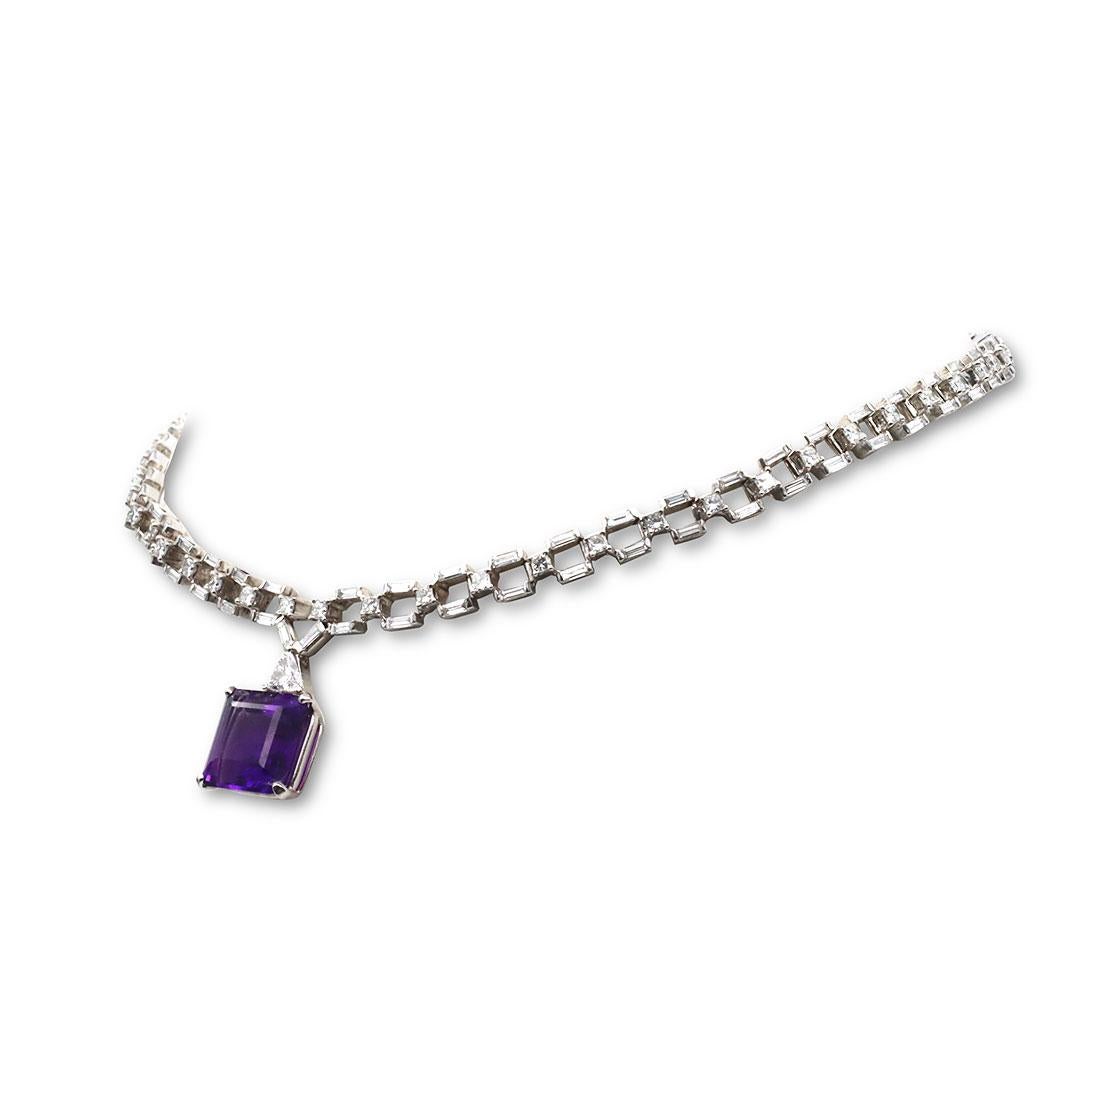 Stunning necklace crafted in 18 karat white gold is comprised of links set with square and baguette cut diamonds for an estimated 10 carat total weight. The pendant features a stunning square faceted amethyst stone with an estimated 10.08 carat